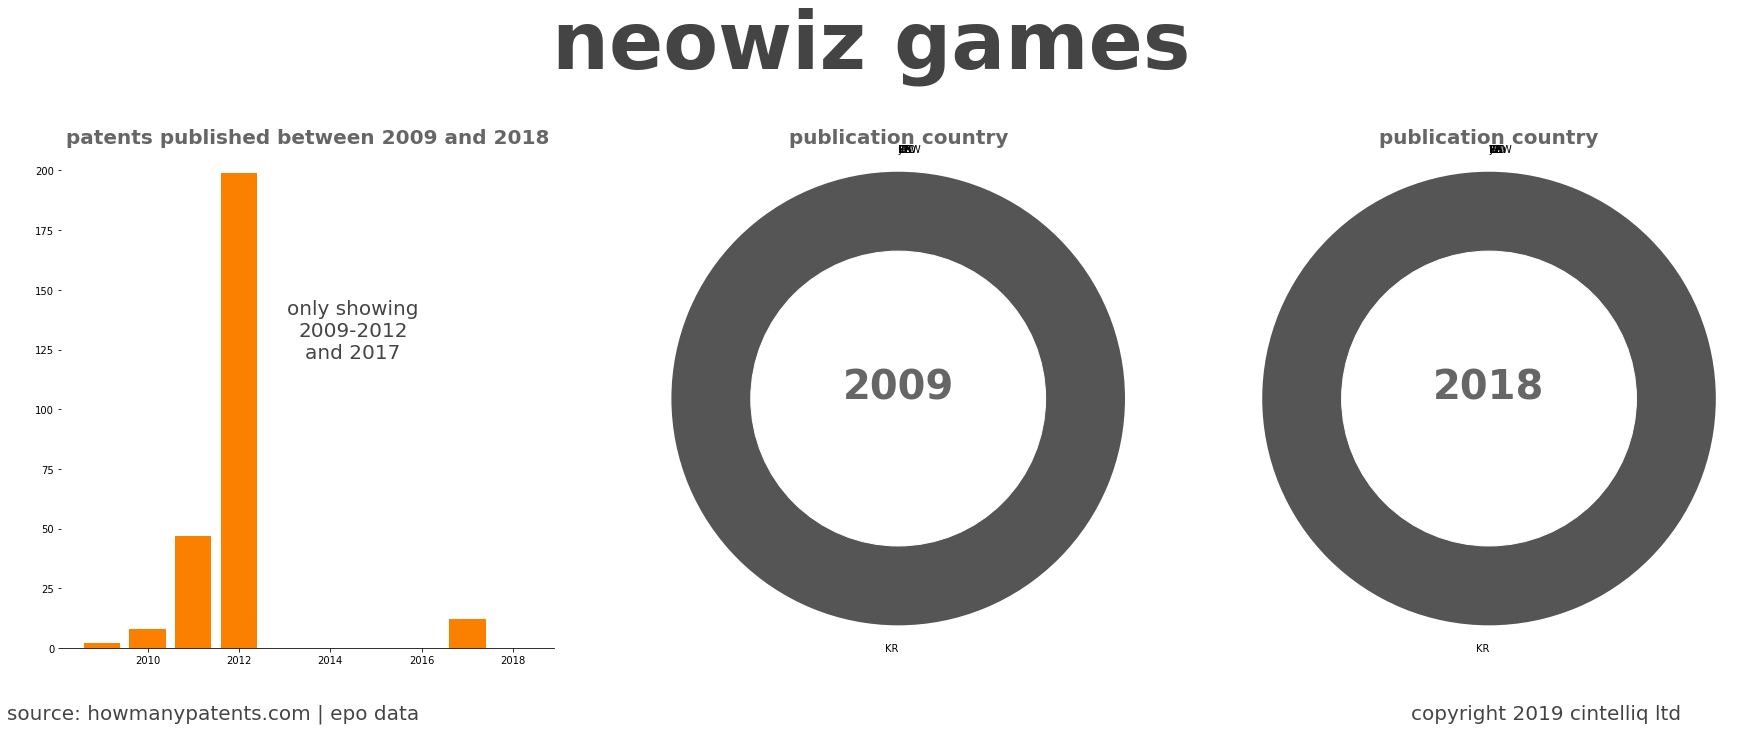 summary of patents for Neowiz Games